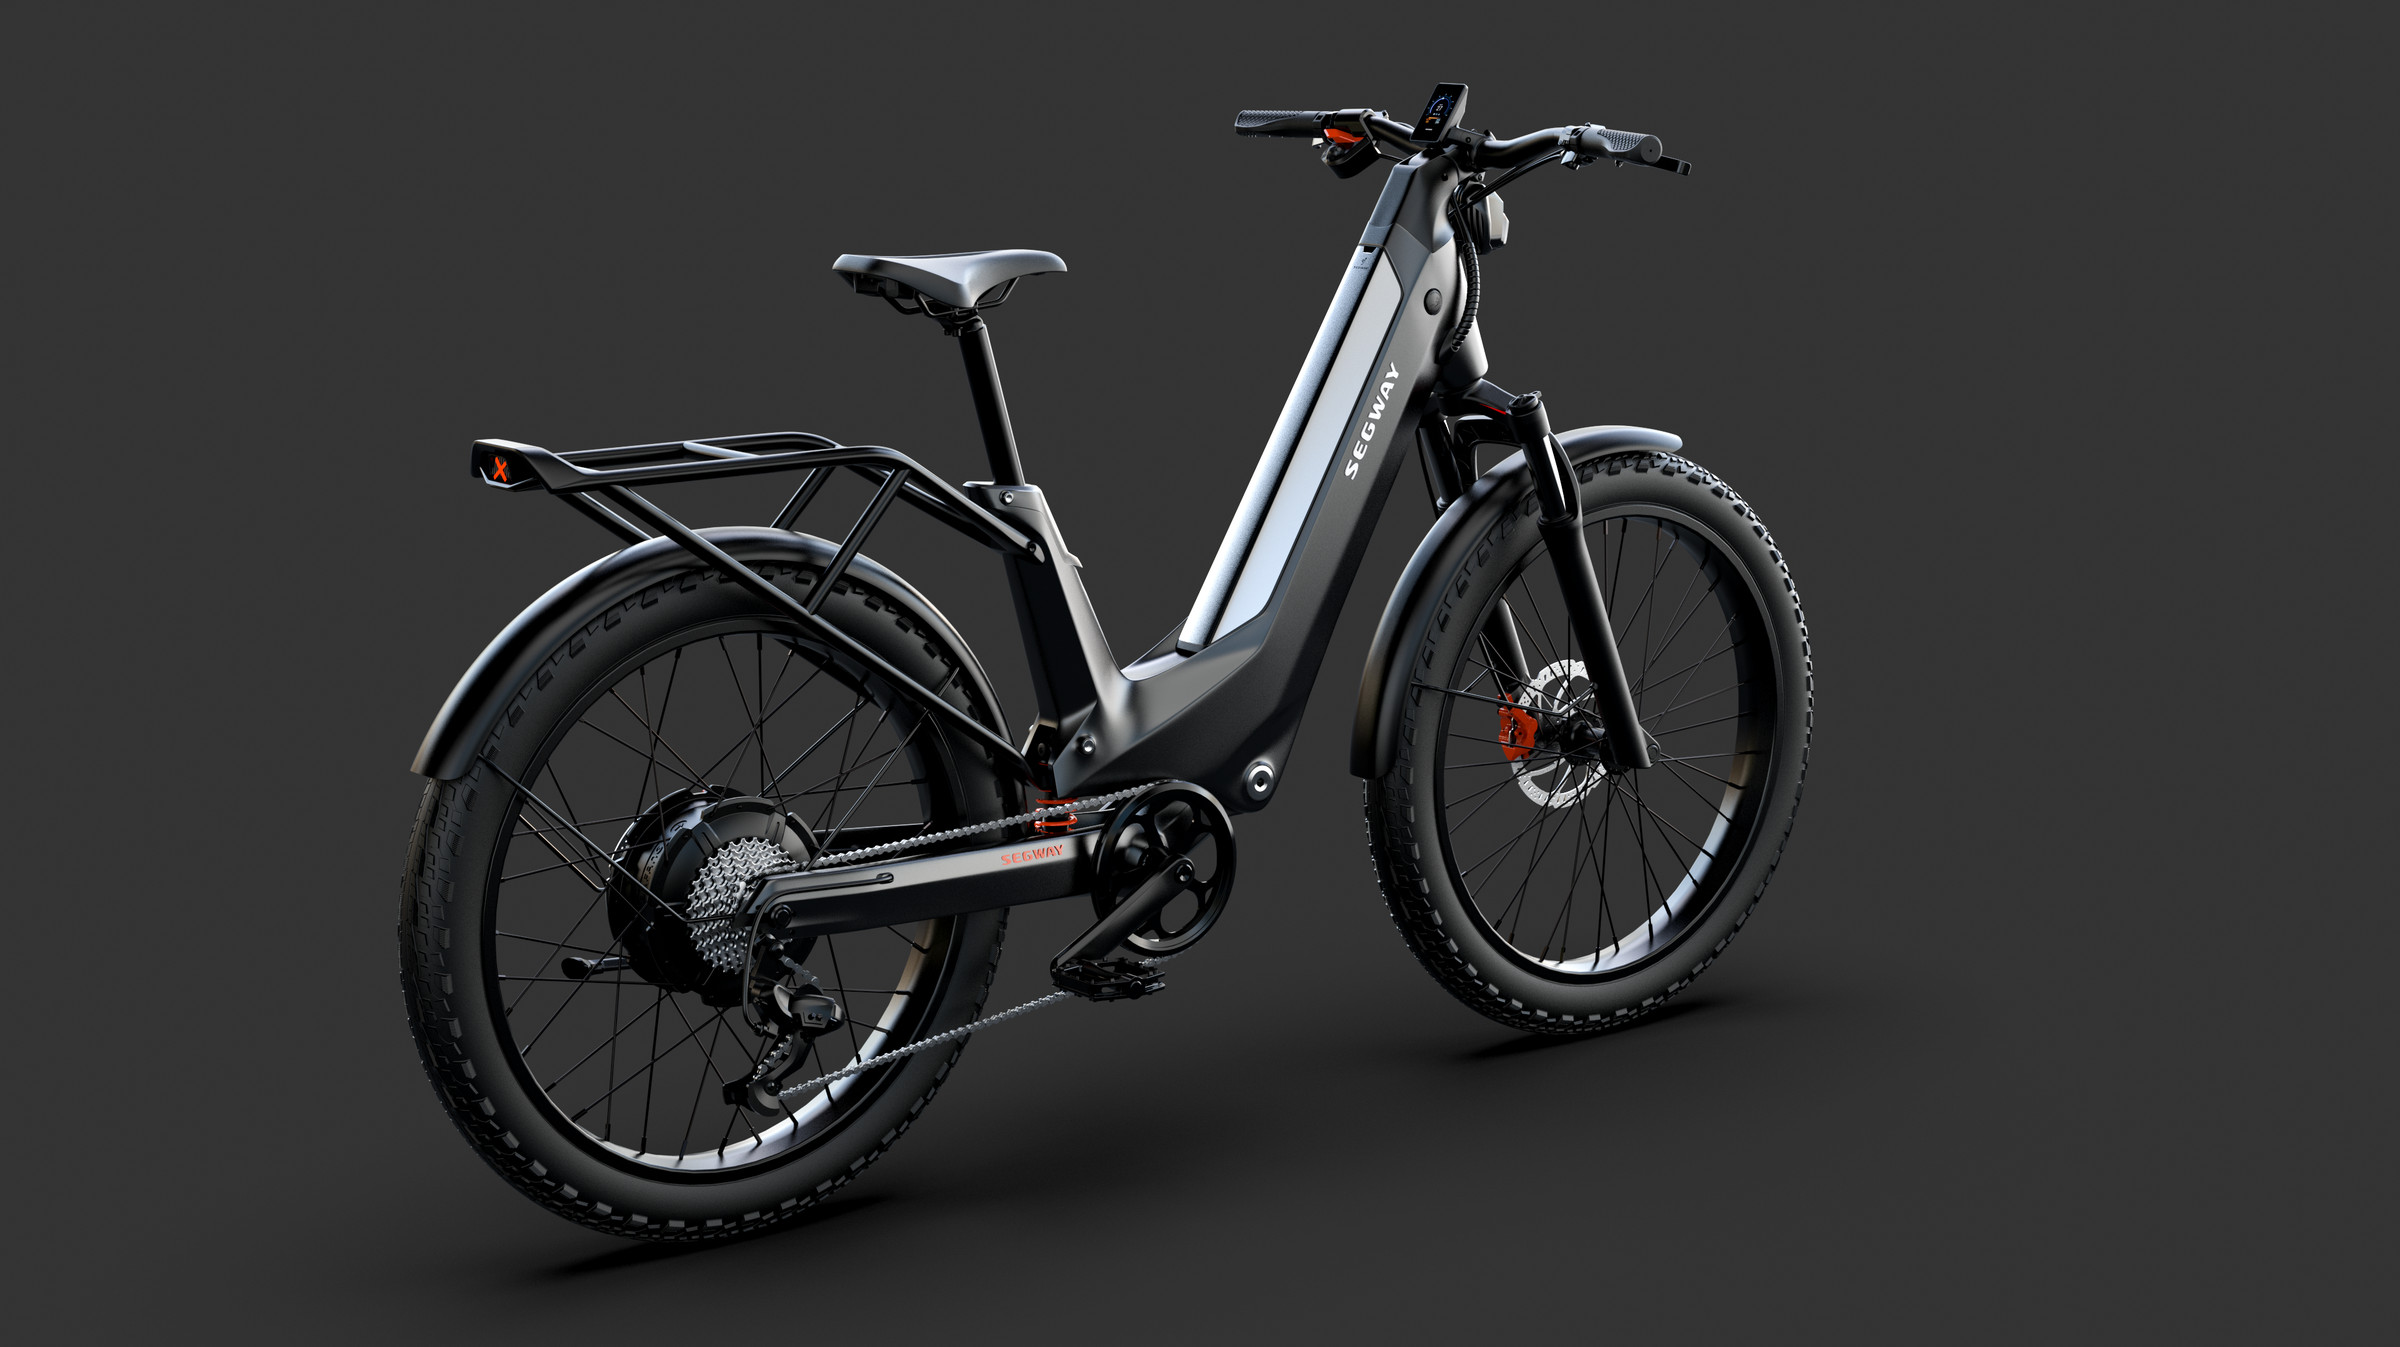 <em>The Xafari does have mudguards and a large 913Wh removable battery. </em>